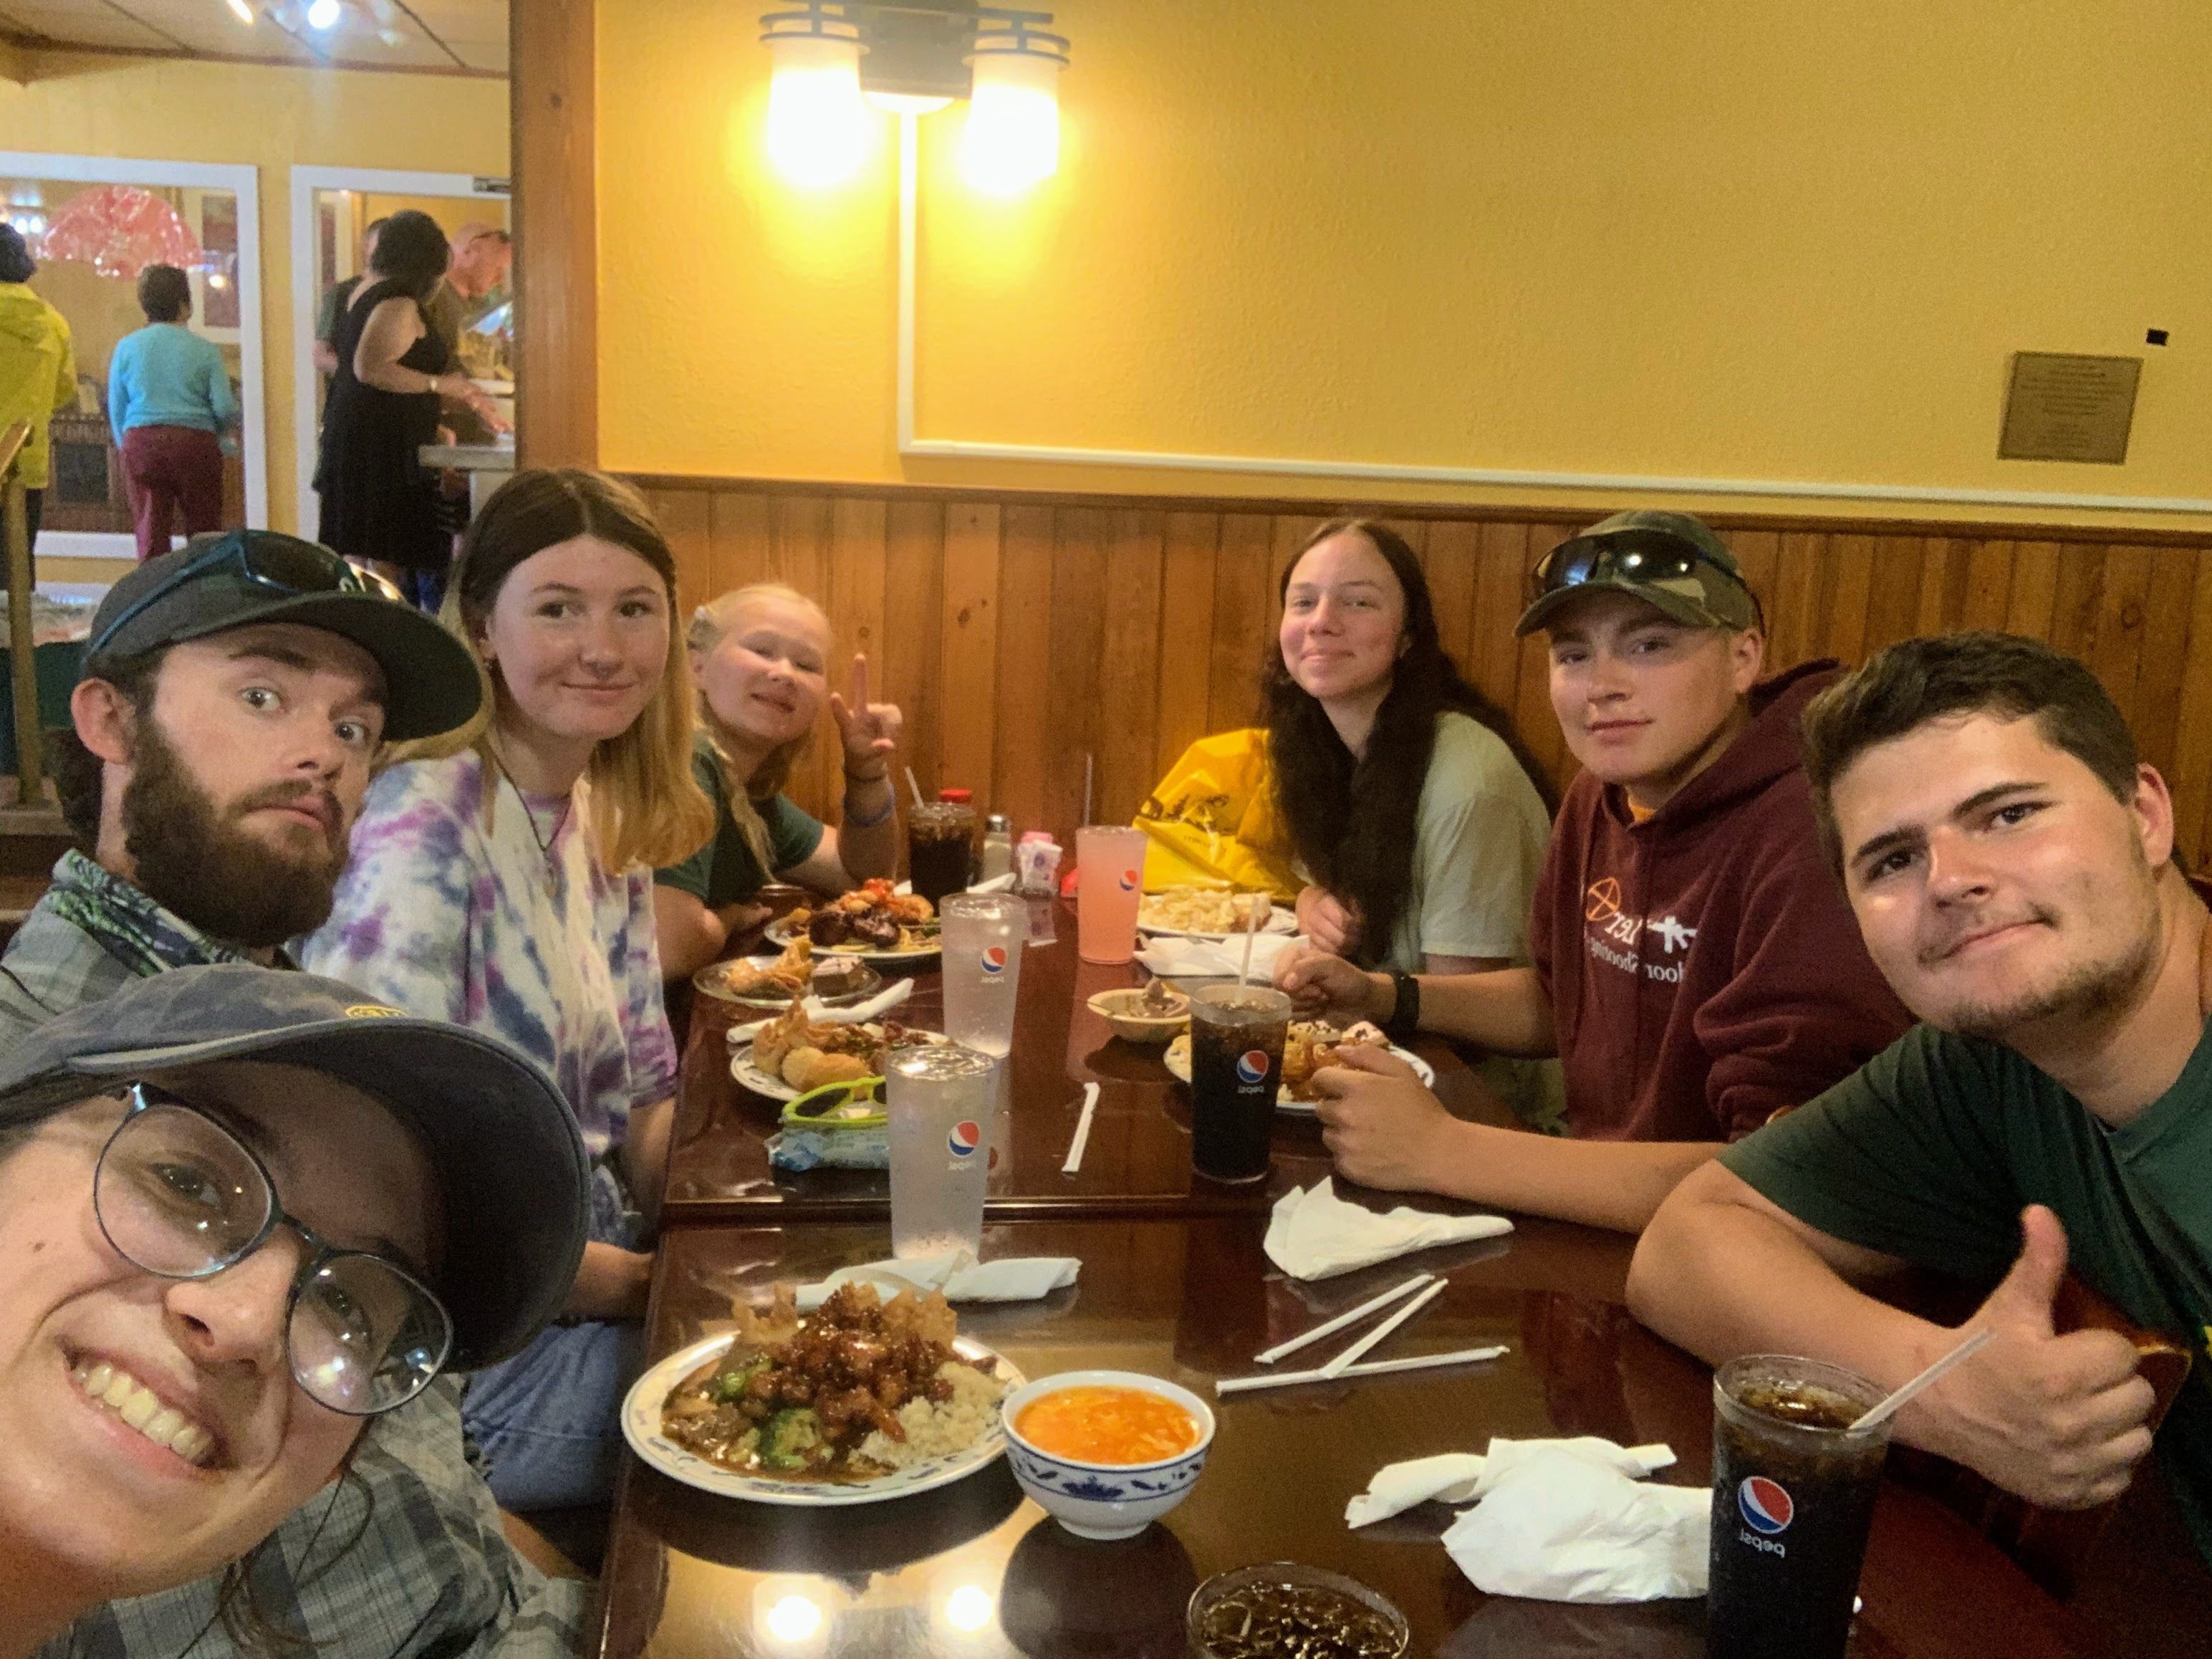 A group of teens and adults sits around a table at the Chinatown Buffet in Cody, WY. They are all smiling.